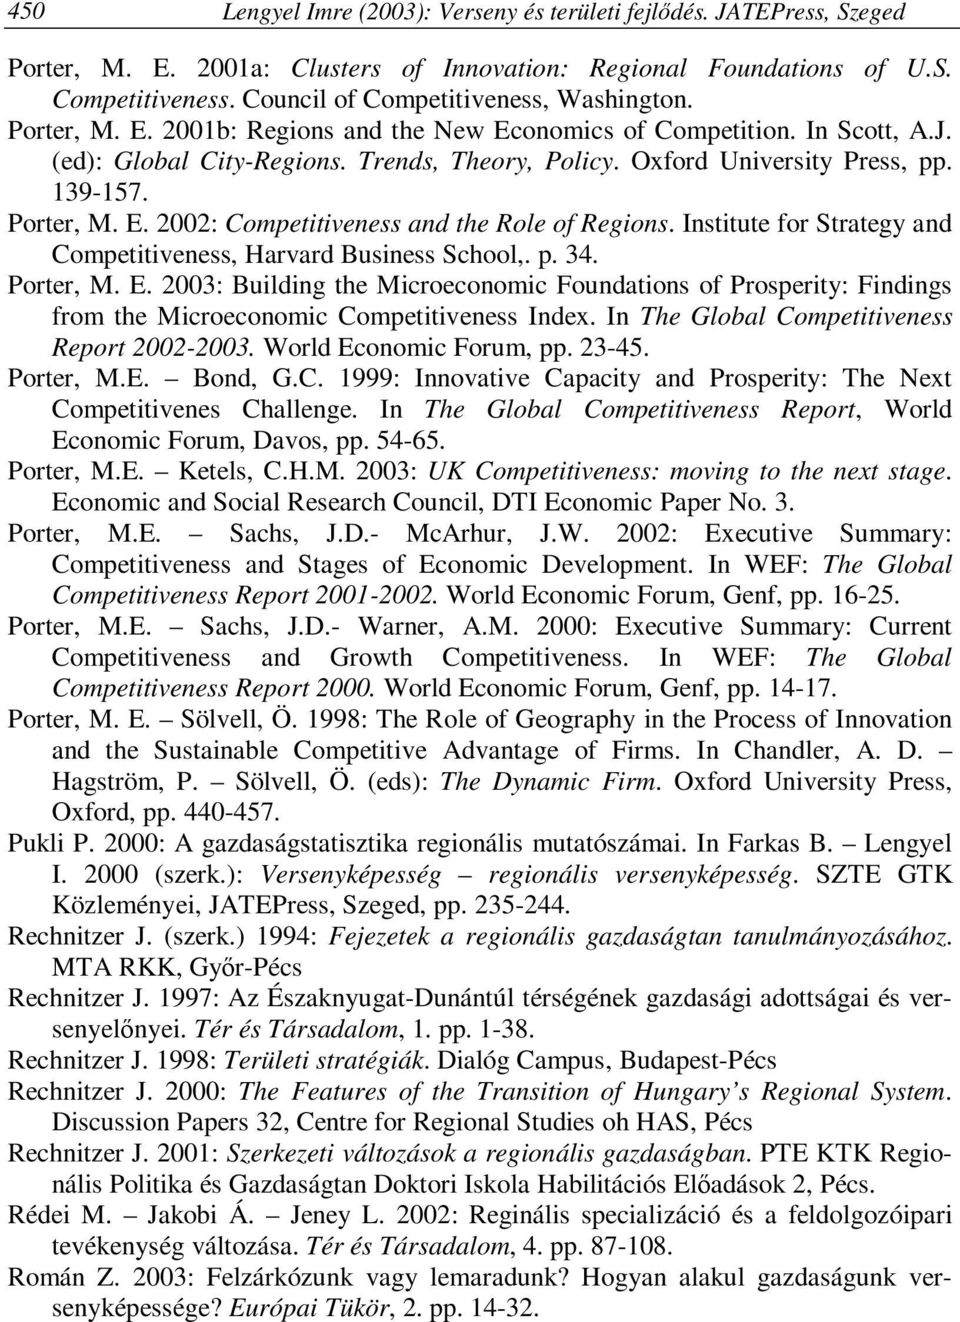 Oxford University Press, pp. 139-157. Porter, M. E. 2002: Competitiveness and the Role of Regions. Institute for Strategy and Competitiveness, Harvard Business School,. p. 34. Porter, M. E. 2003: Building the Microeconomic Foundations of Prosperity: Findings from the Microeconomic Competitiveness Index.